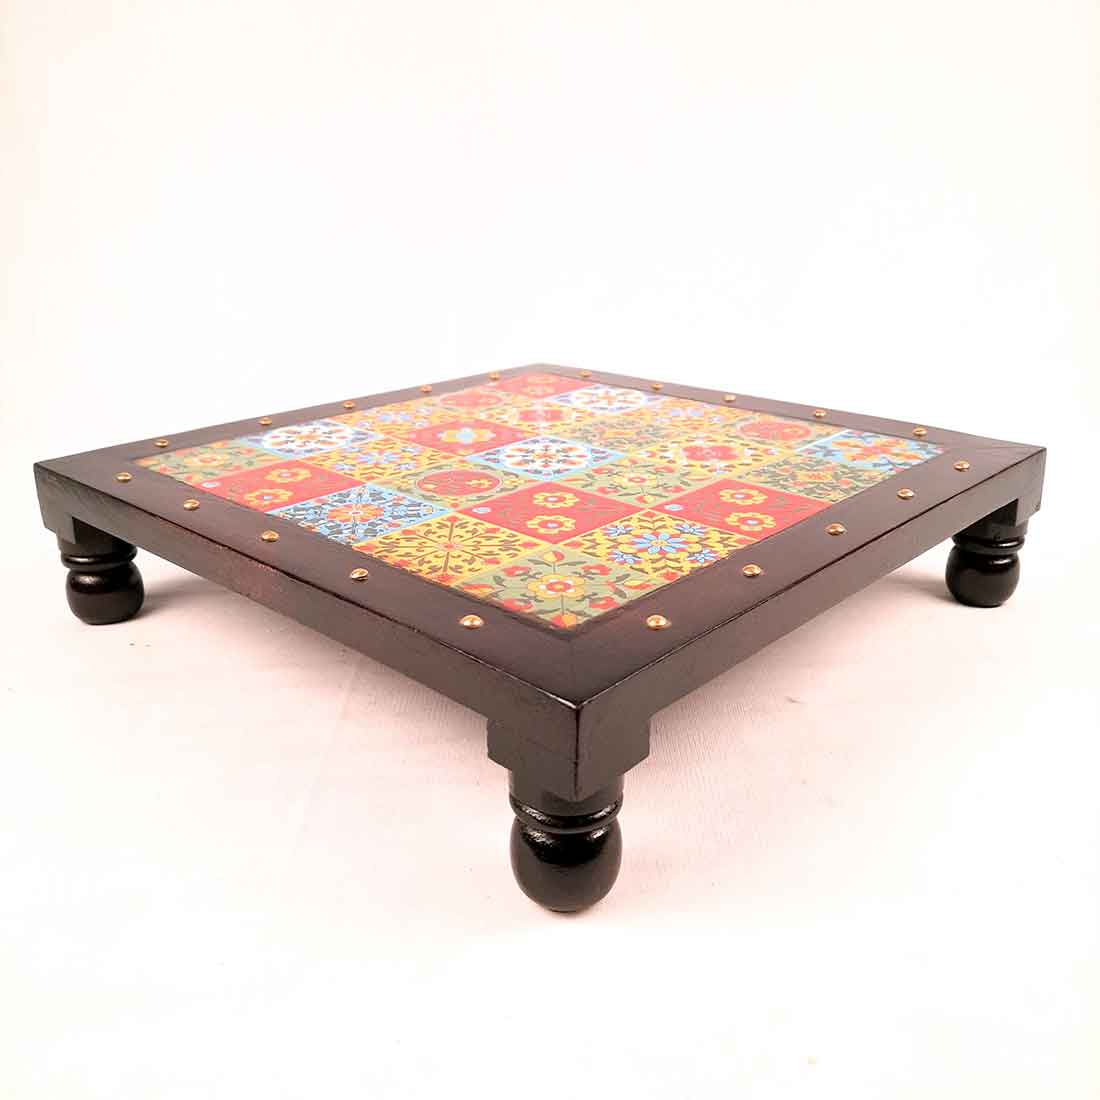 Wooden Chowki with Ceramic Tiles - For Pooja, Sitting & Home Decor - Apkamart #Size_12 Inch